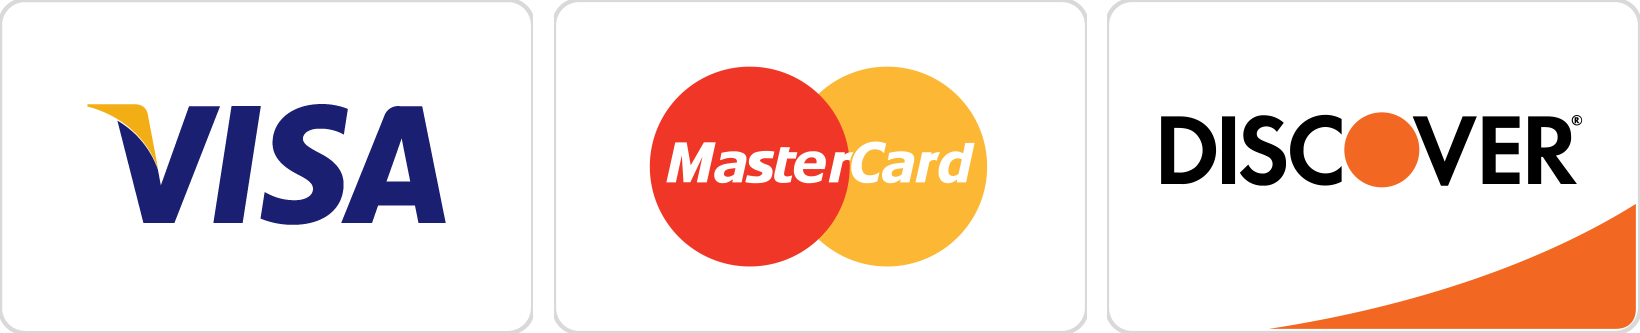 We Accept Visa, MasterCard and Discover Card